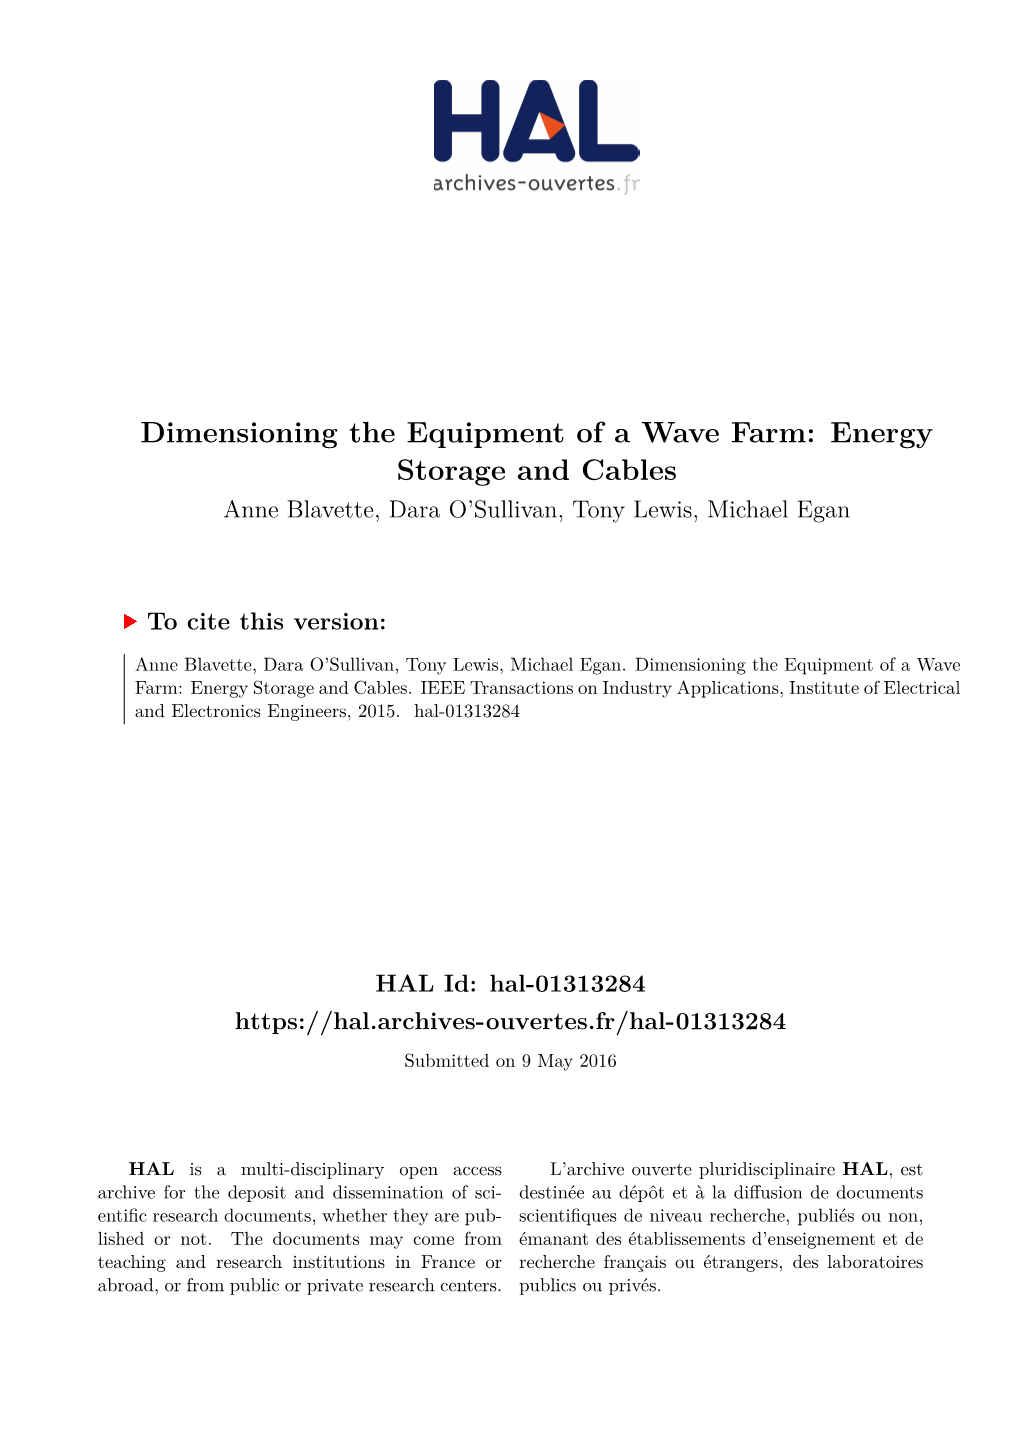 Dimensioning the Equipment of a Wave Farm: Energy Storage and Cables Anne Blavette, Dara O’Sullivan, Tony Lewis, Michael Egan